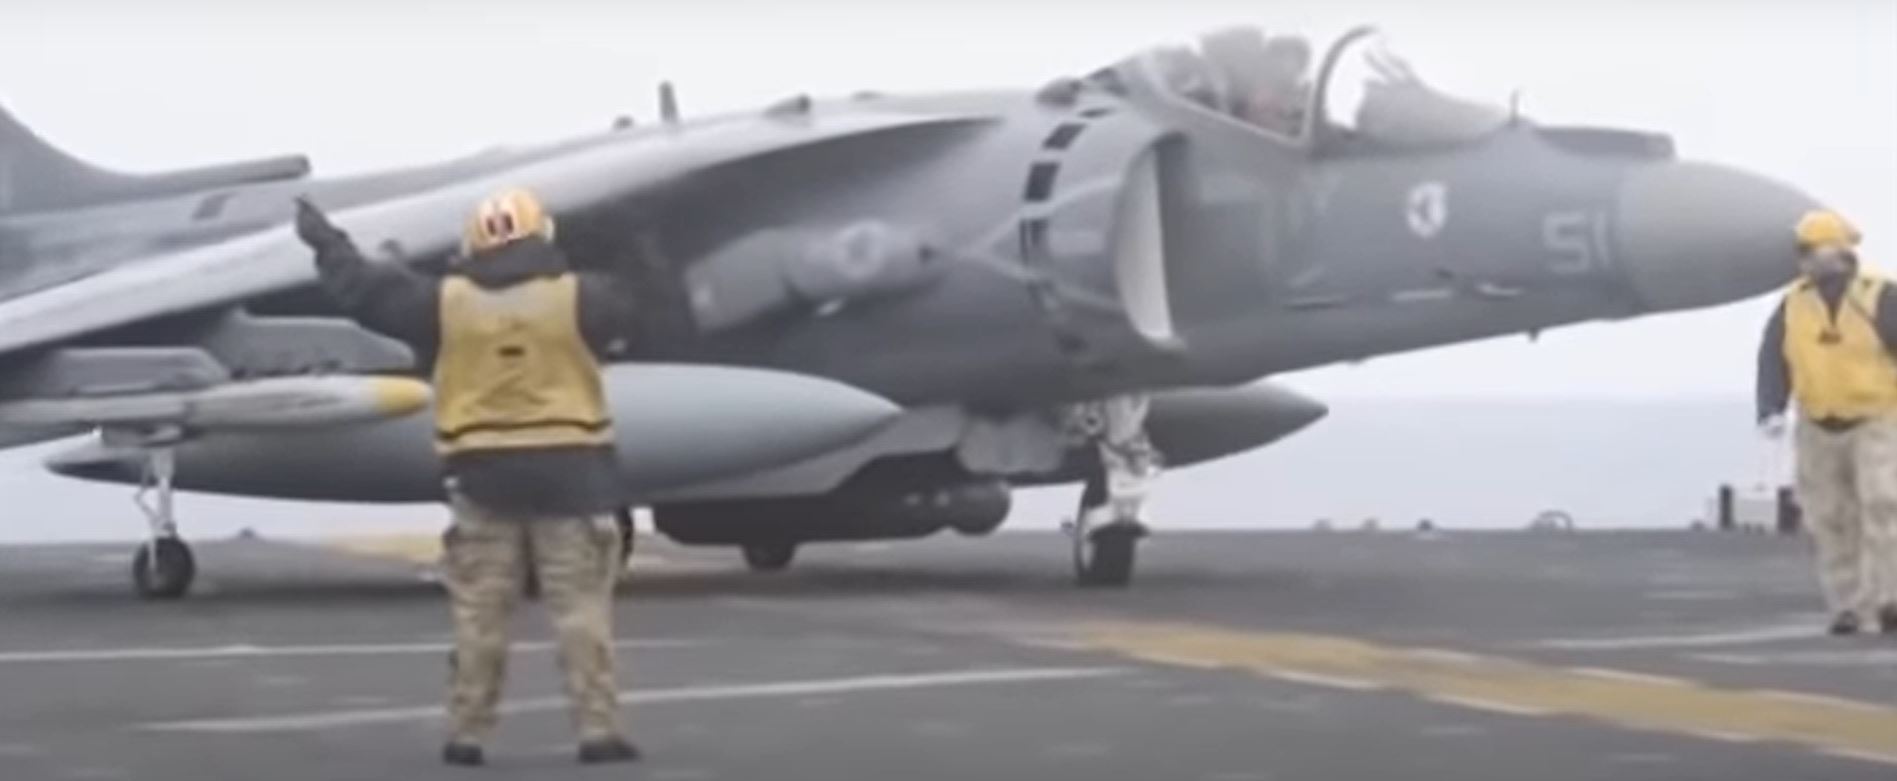 Meet Captain Mahoney, Who Landed A Harrier Precisely On A Stool 1